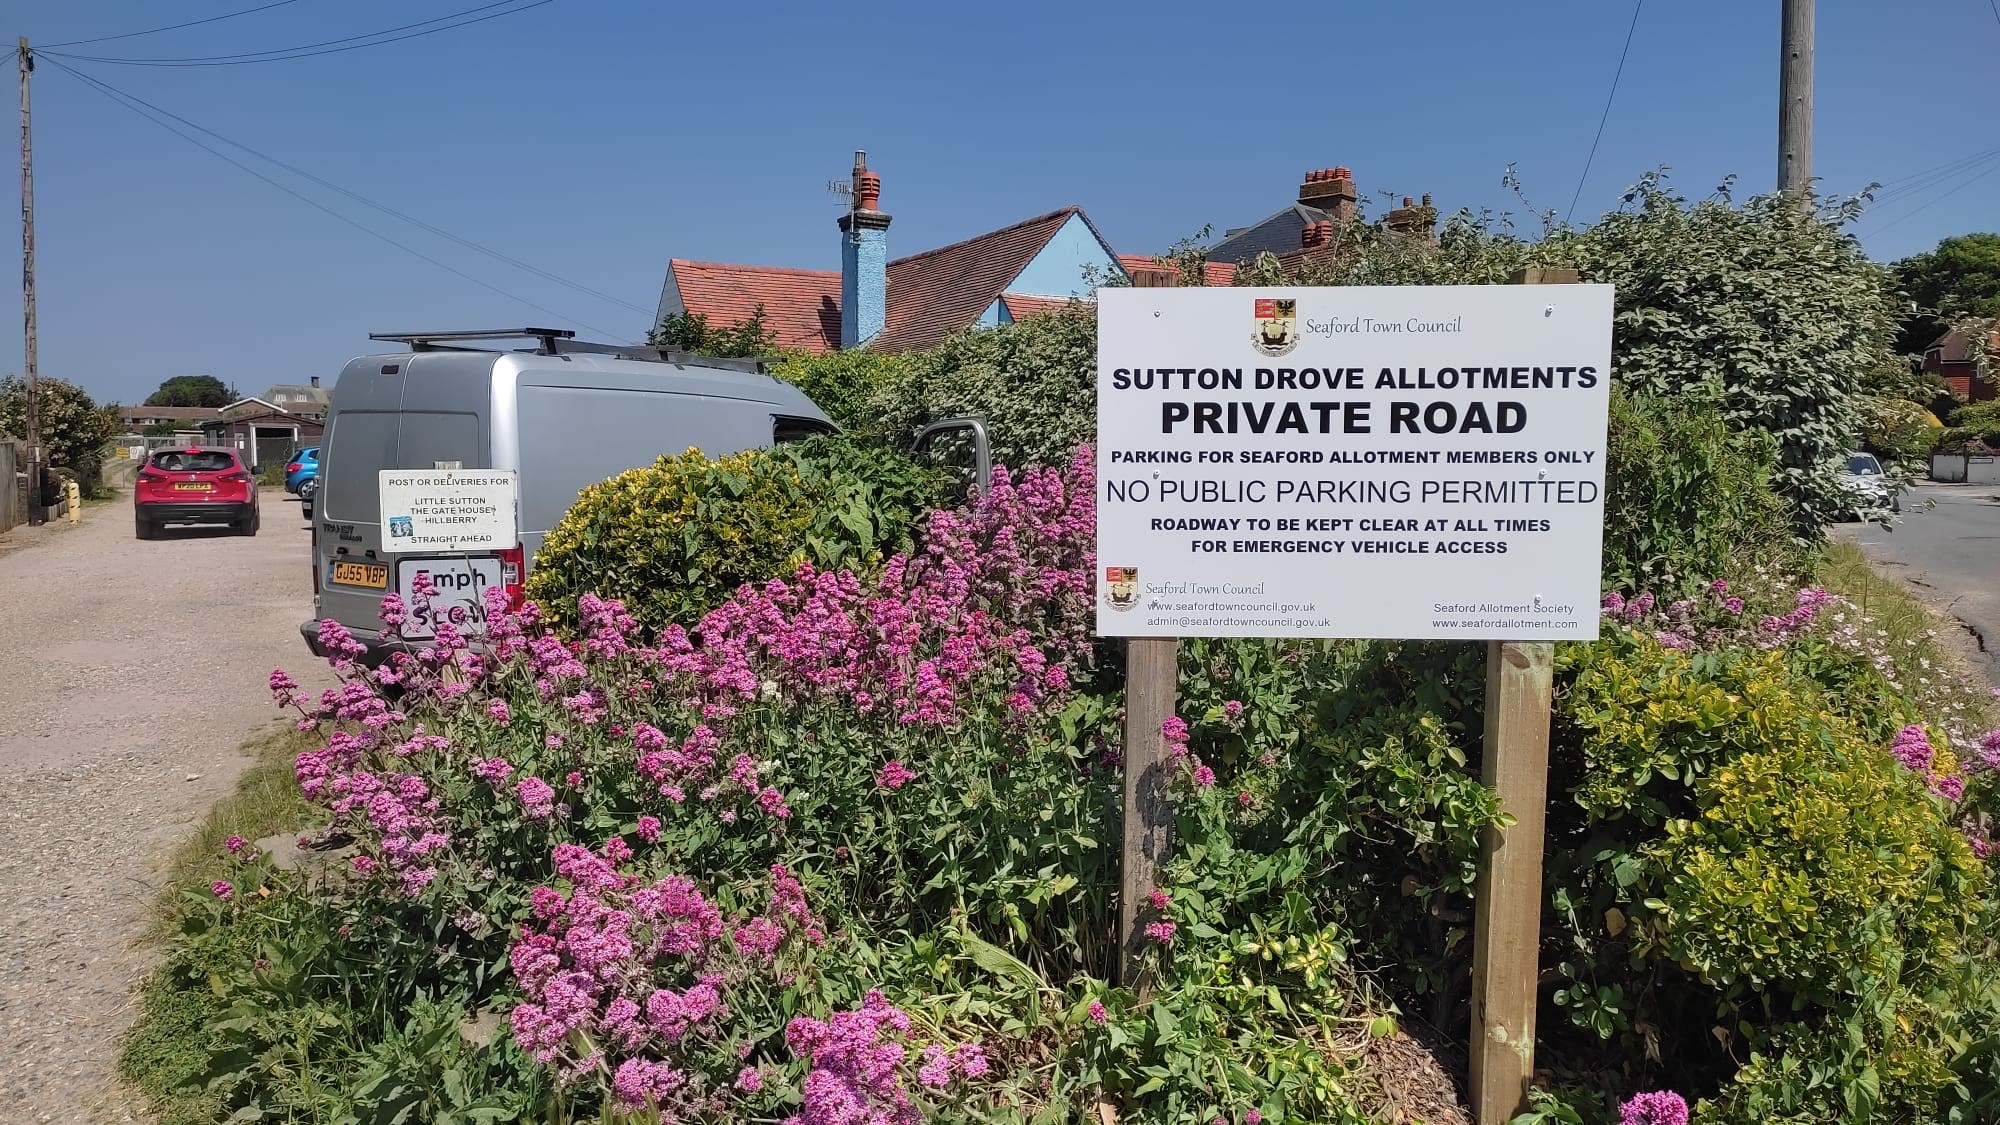 Sutton Drove Allotments with new improved sign recently installed